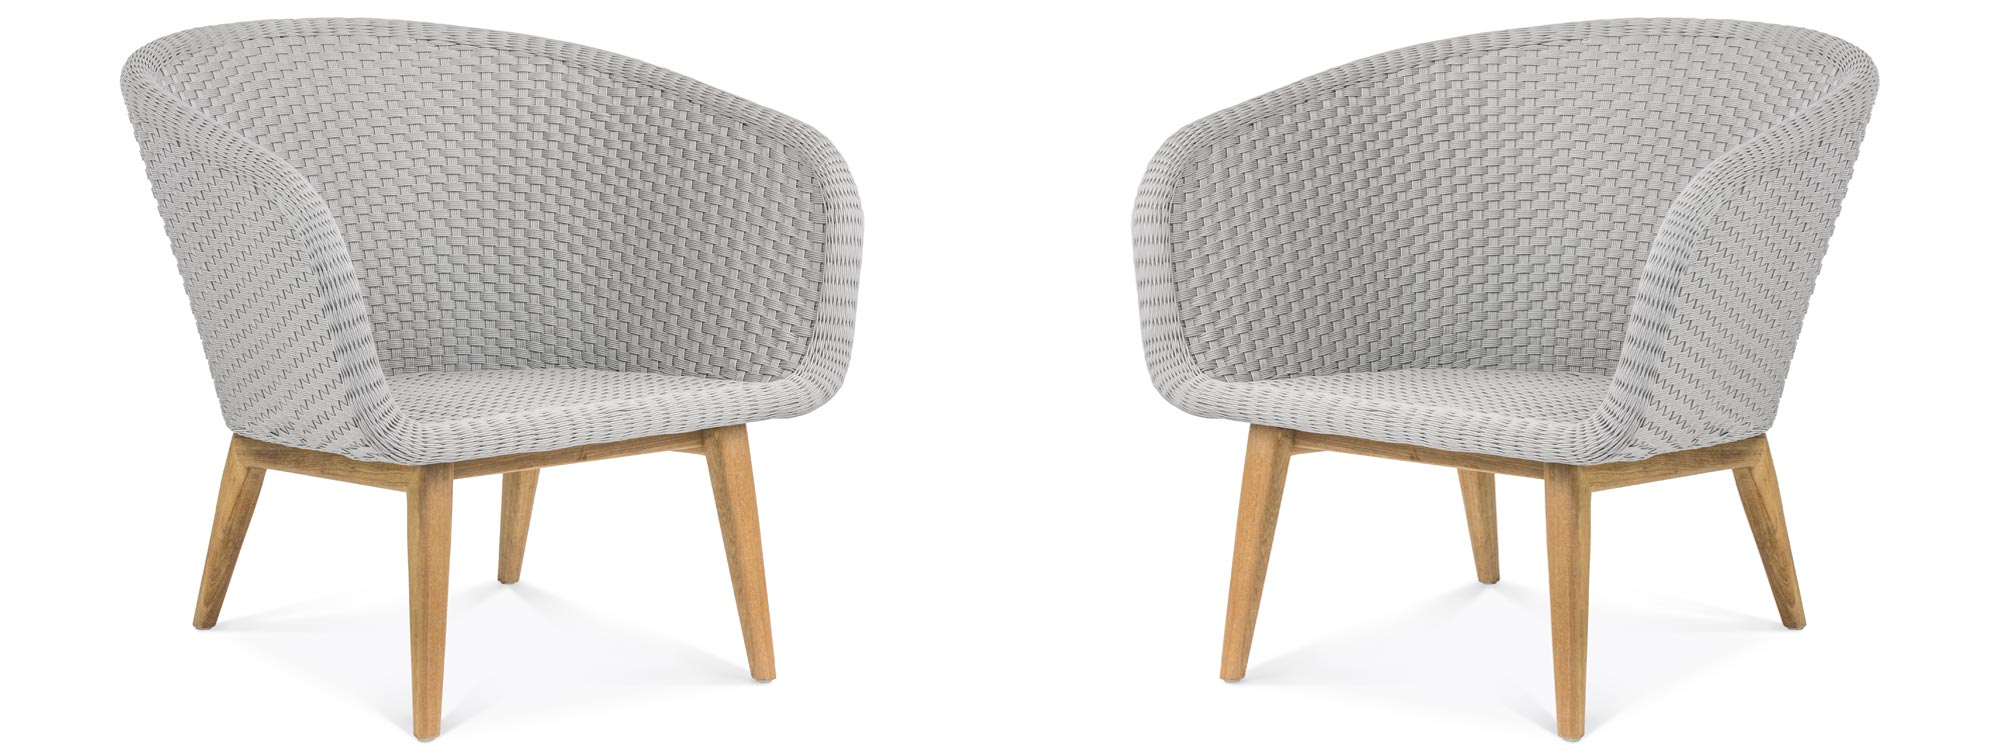 Image of pair of Shell retro garden chairs by Jan des Bouvrie for FueraDentro